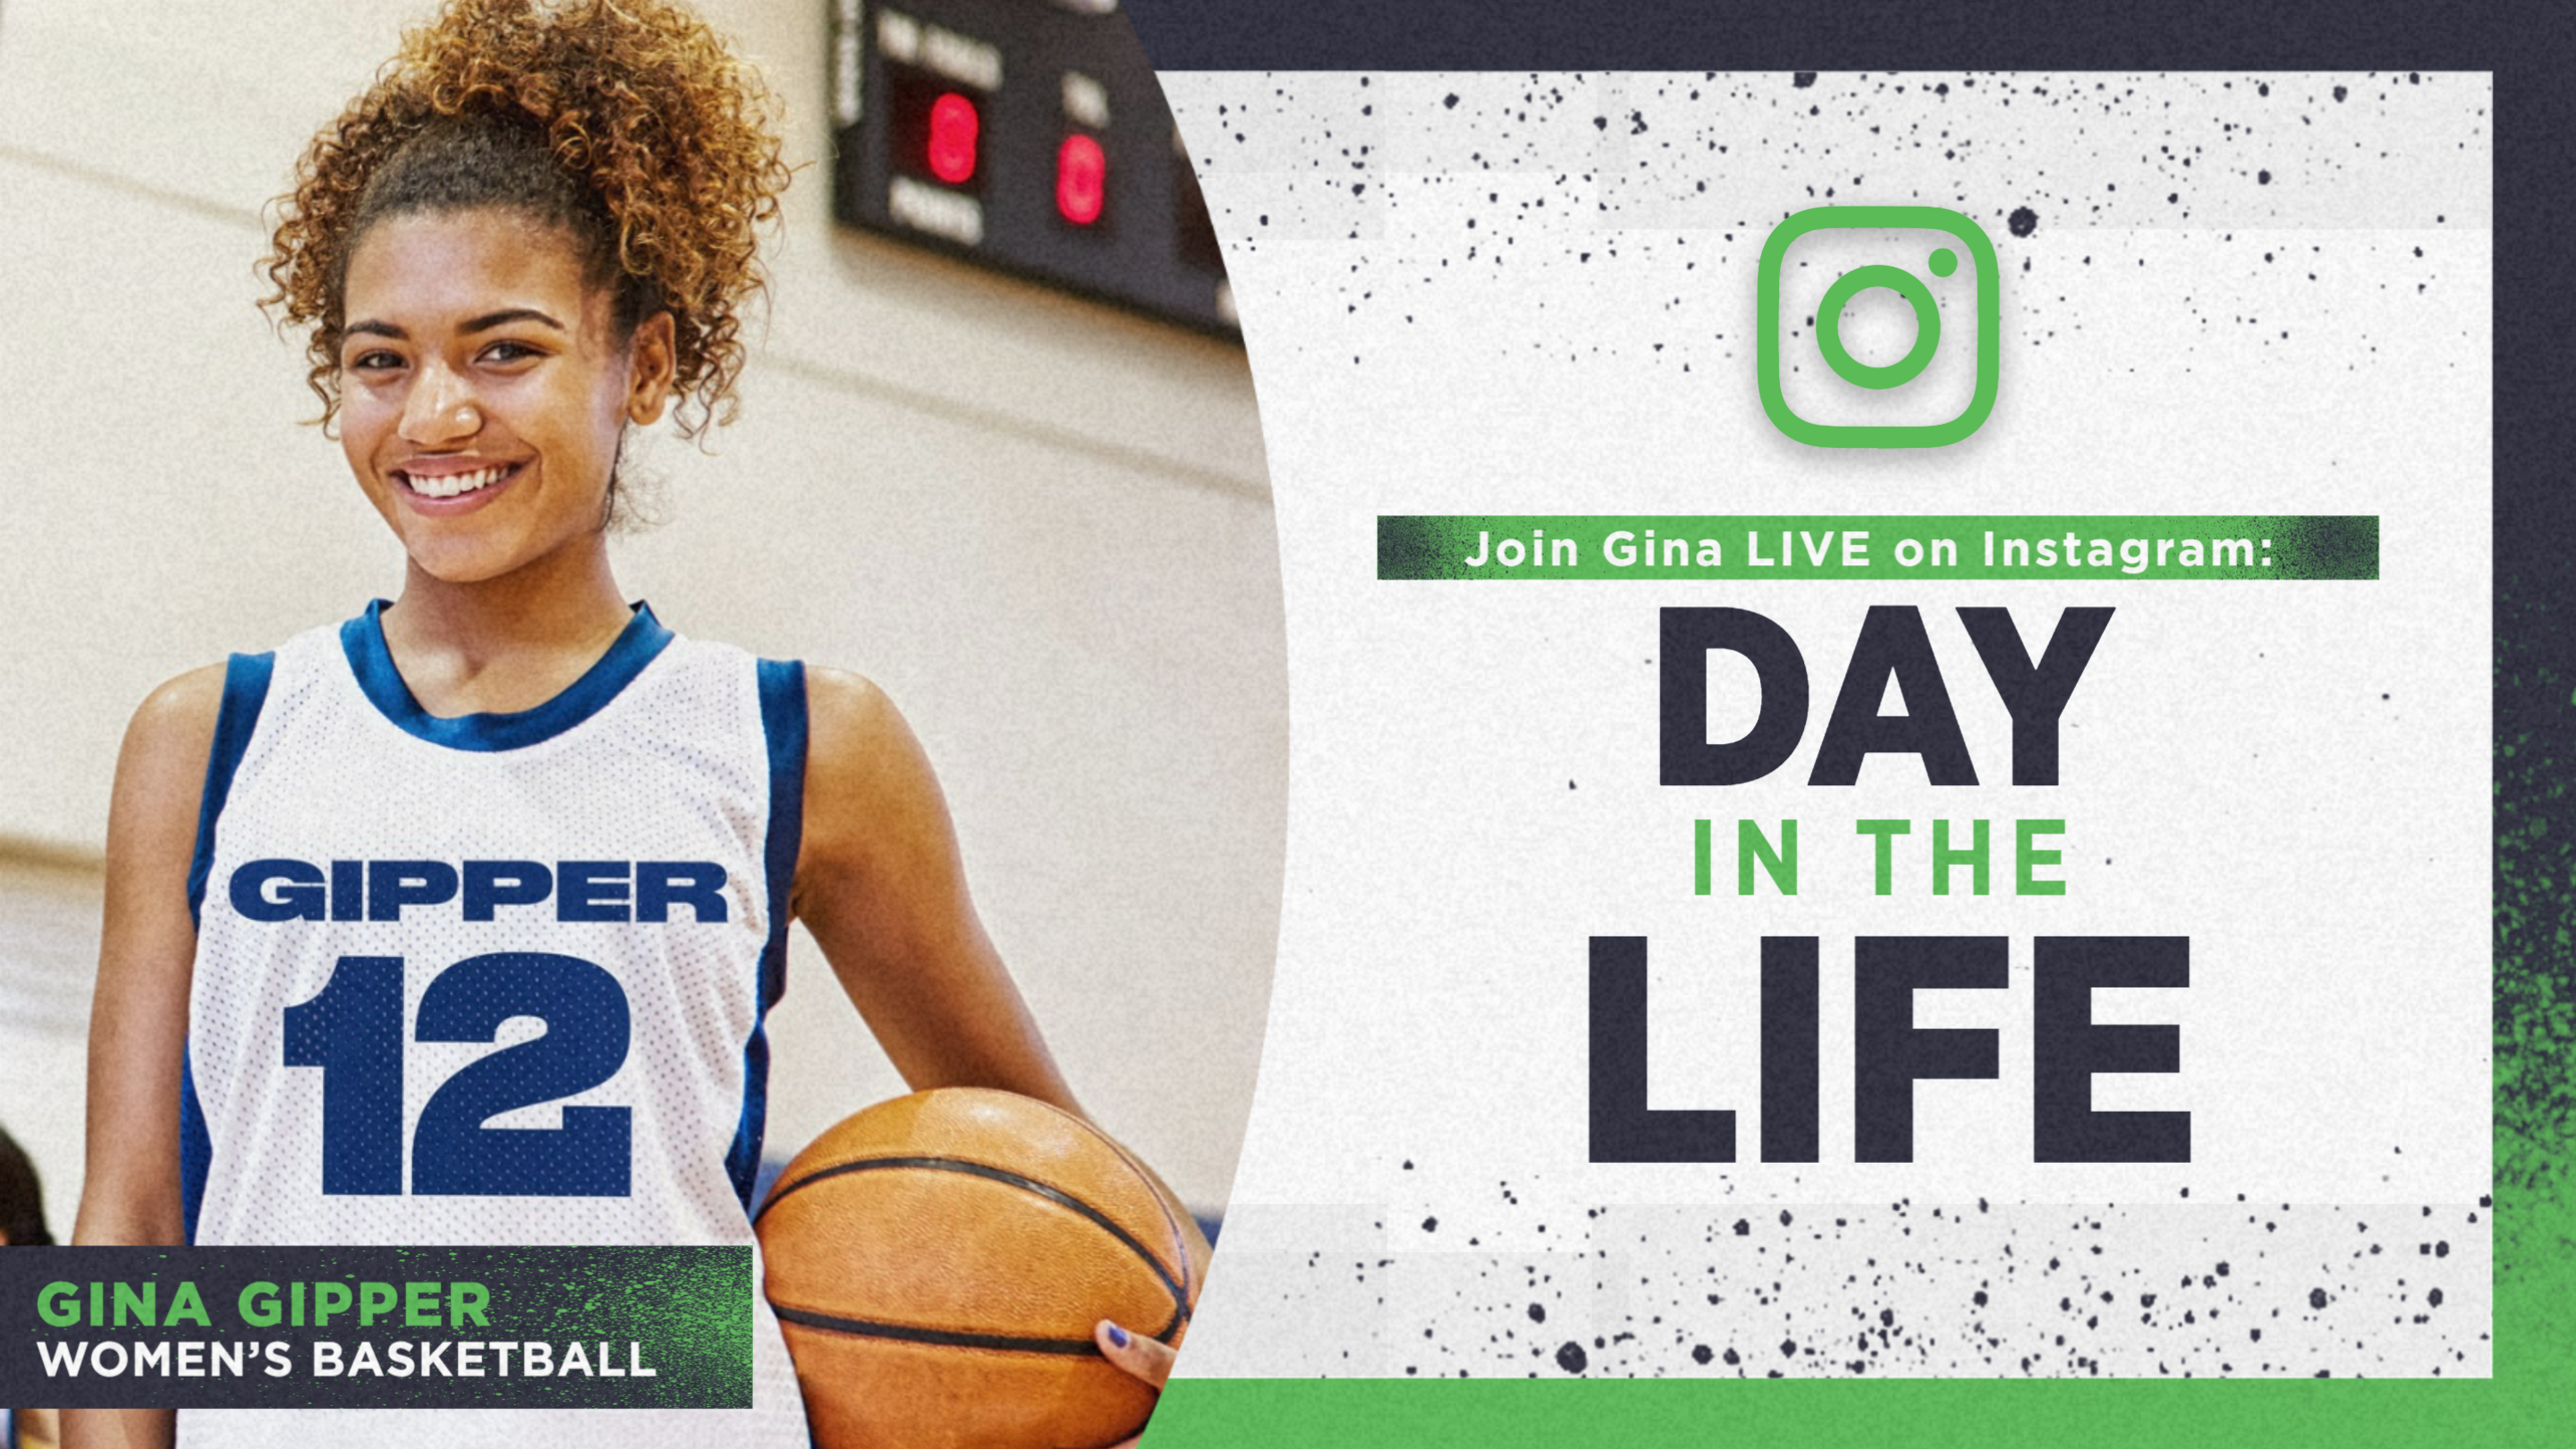 Relatable Content example of a female basketball player promoting an Instagram takeover, day in the life of an athlete.